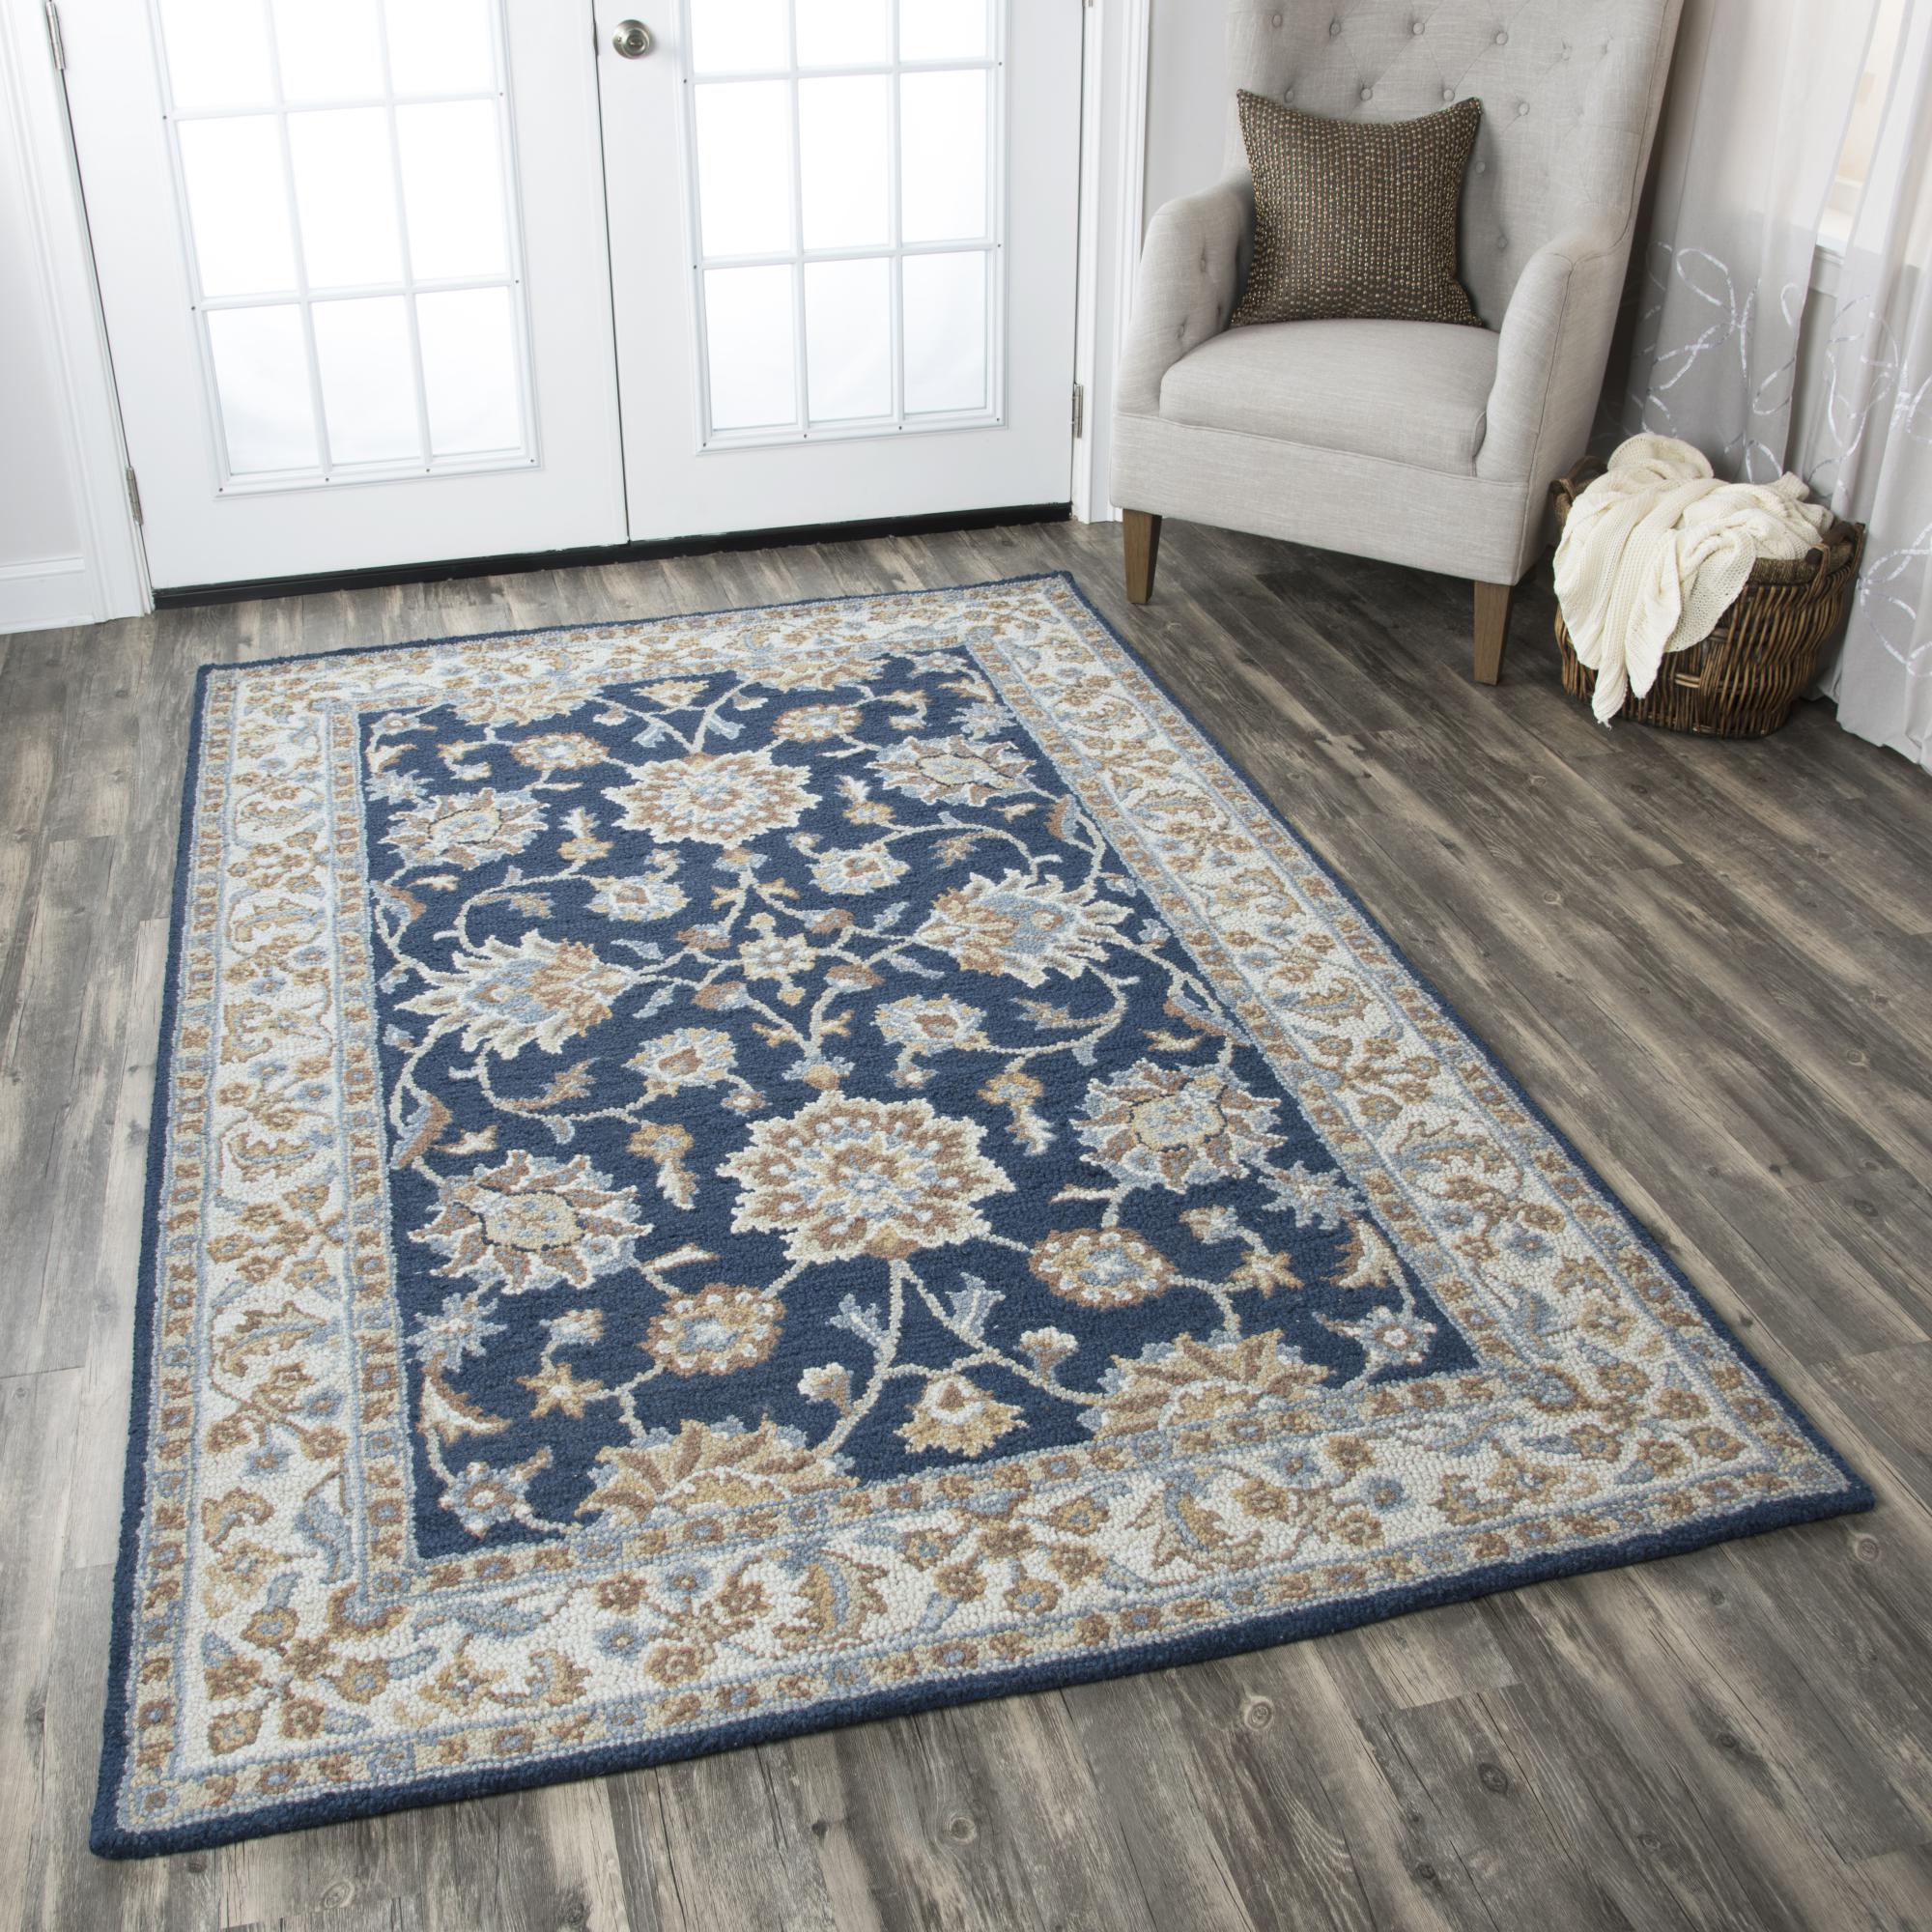 Rizzy Home AL2823 Blue 12' x 15' Hand-Tufted Area Rug - image 1 of 5